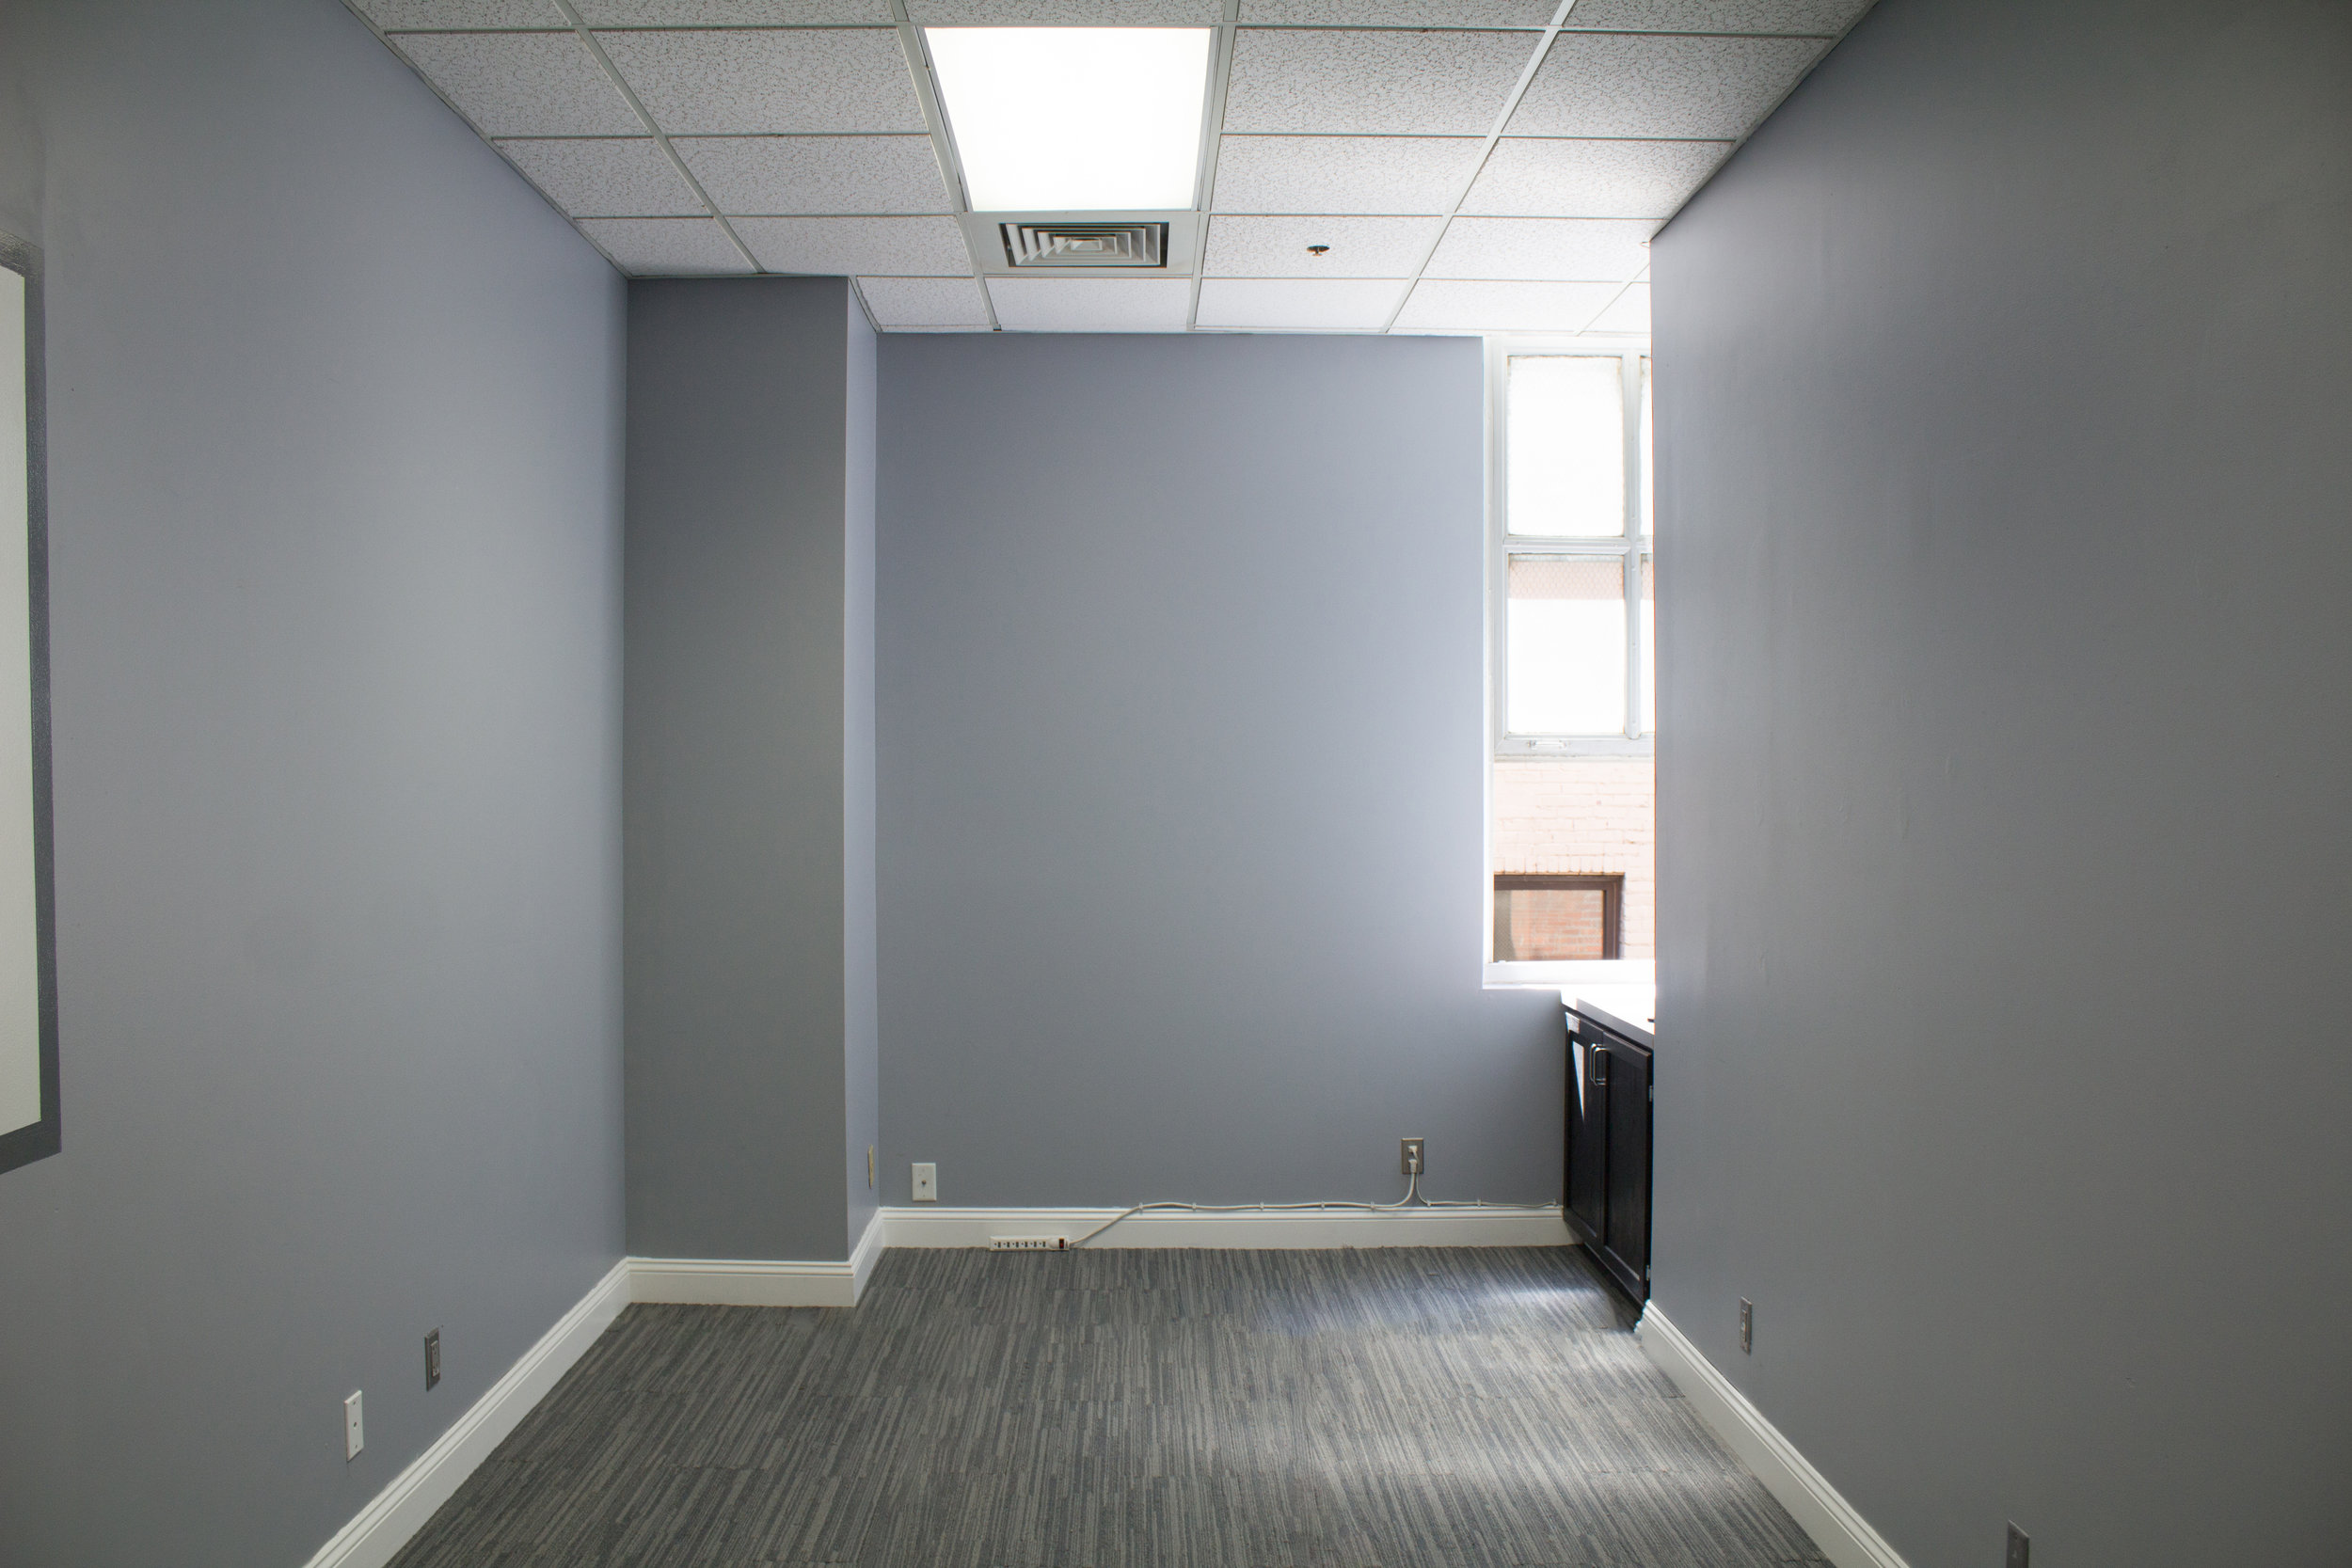 BEFORE - snapped this photo of our studio space the day we signed the lease! We have lots of work ahead of us!